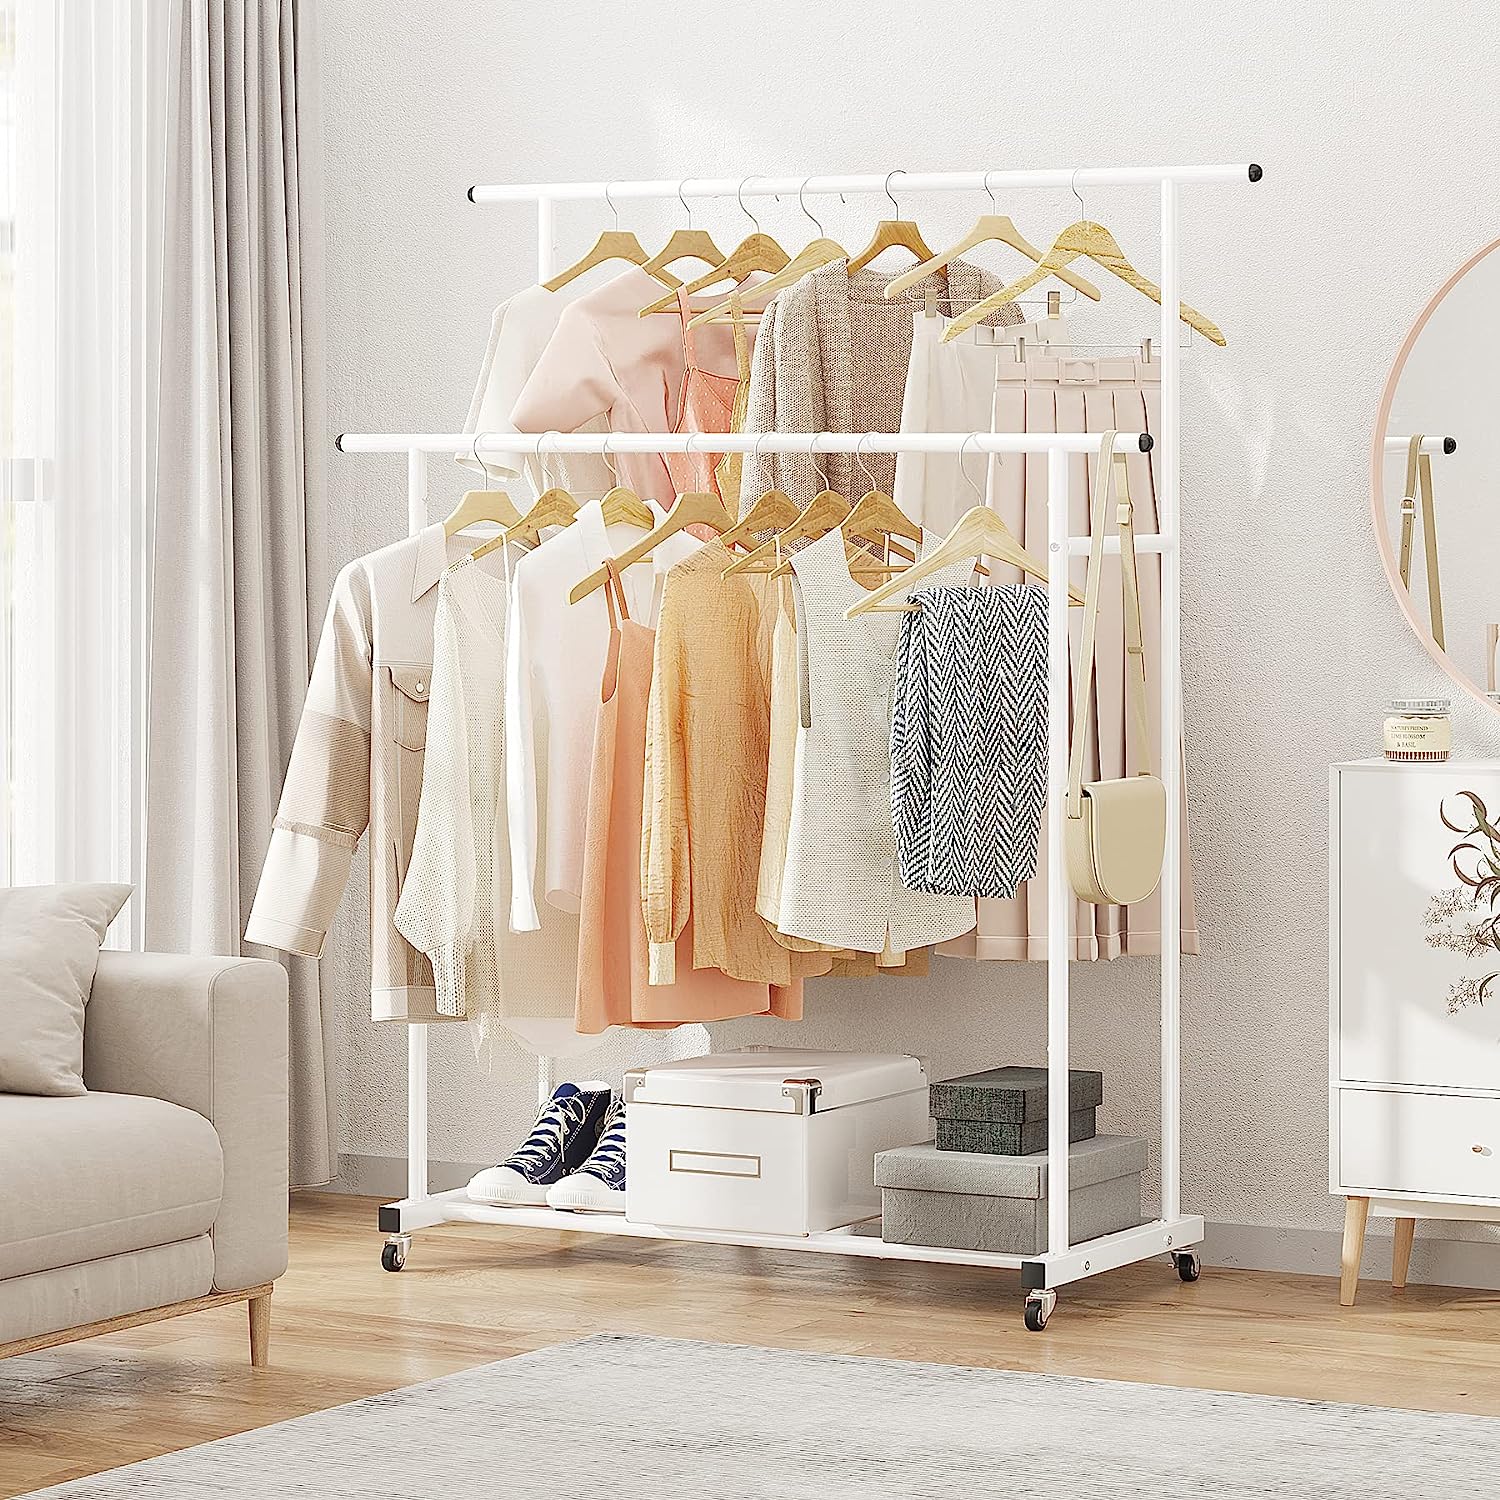 How To Store Clothes Without Closet